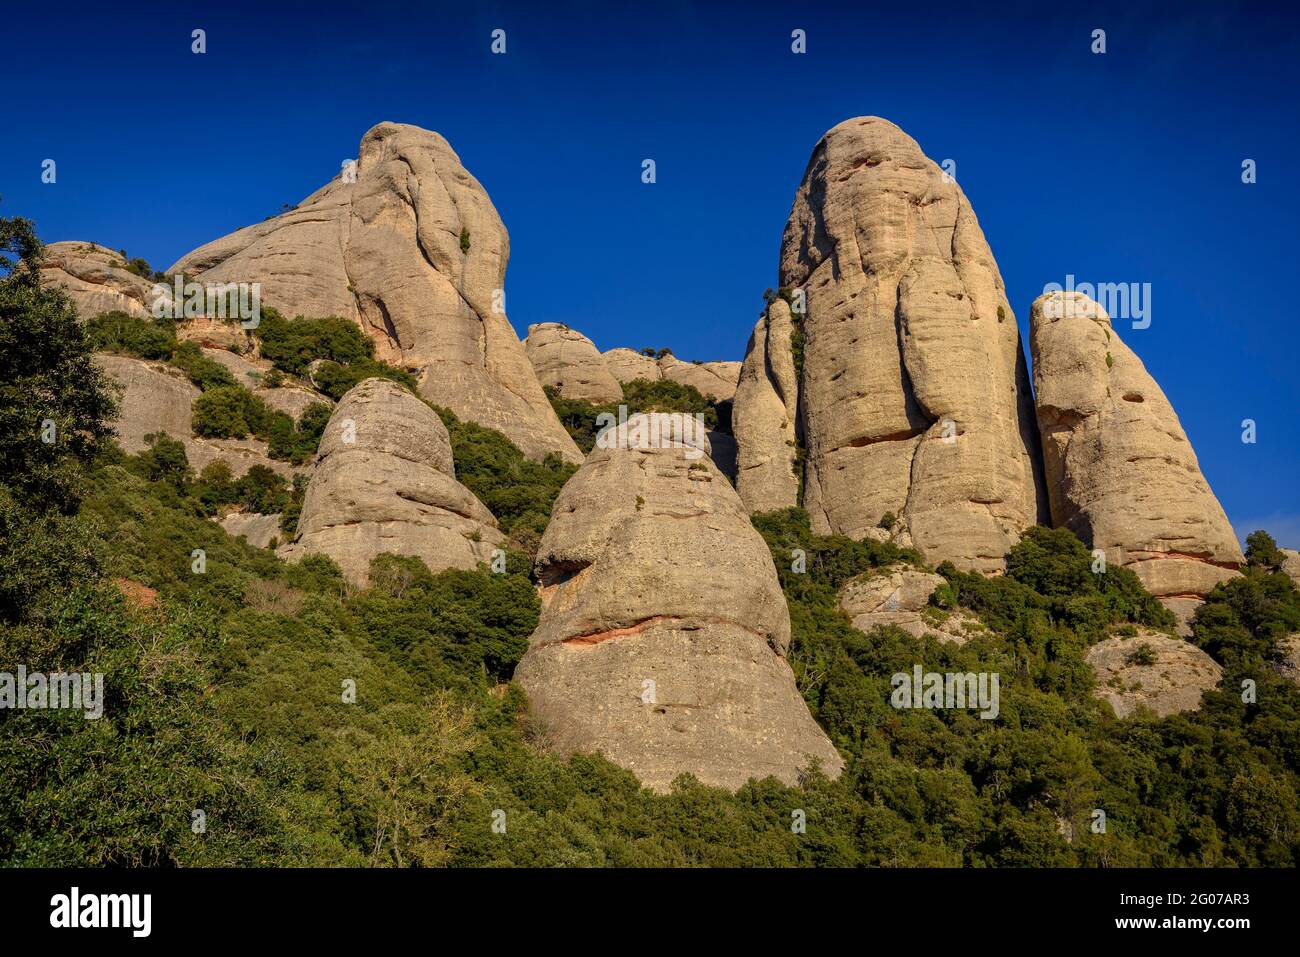 Elefant and La Mòmia spires seen from the path to the hermitage of Sant Benet (Montserrat, Catalonia, Spain) Stock Photo